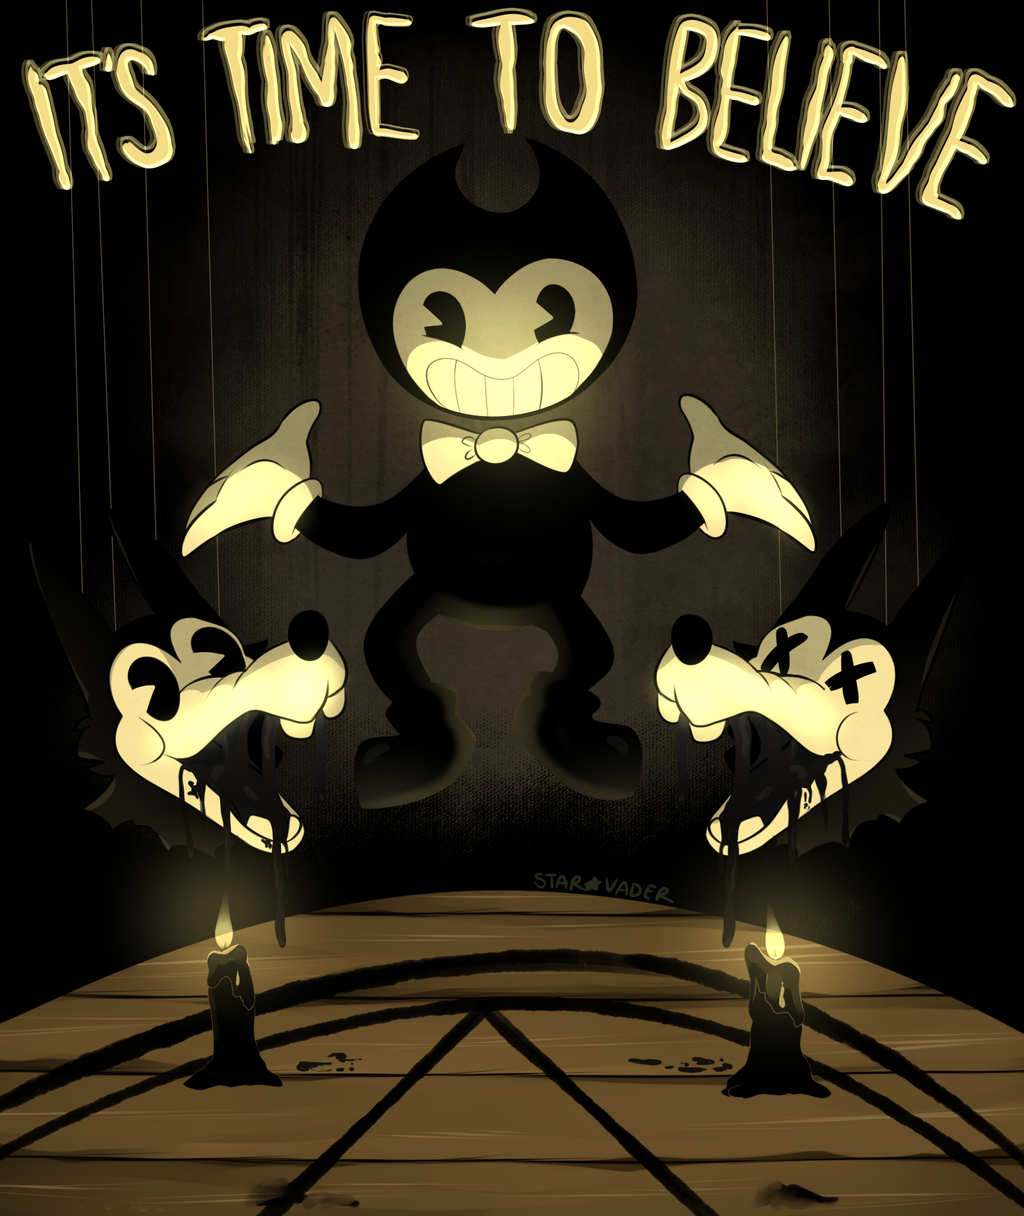 Bendy And The Ink Machine 